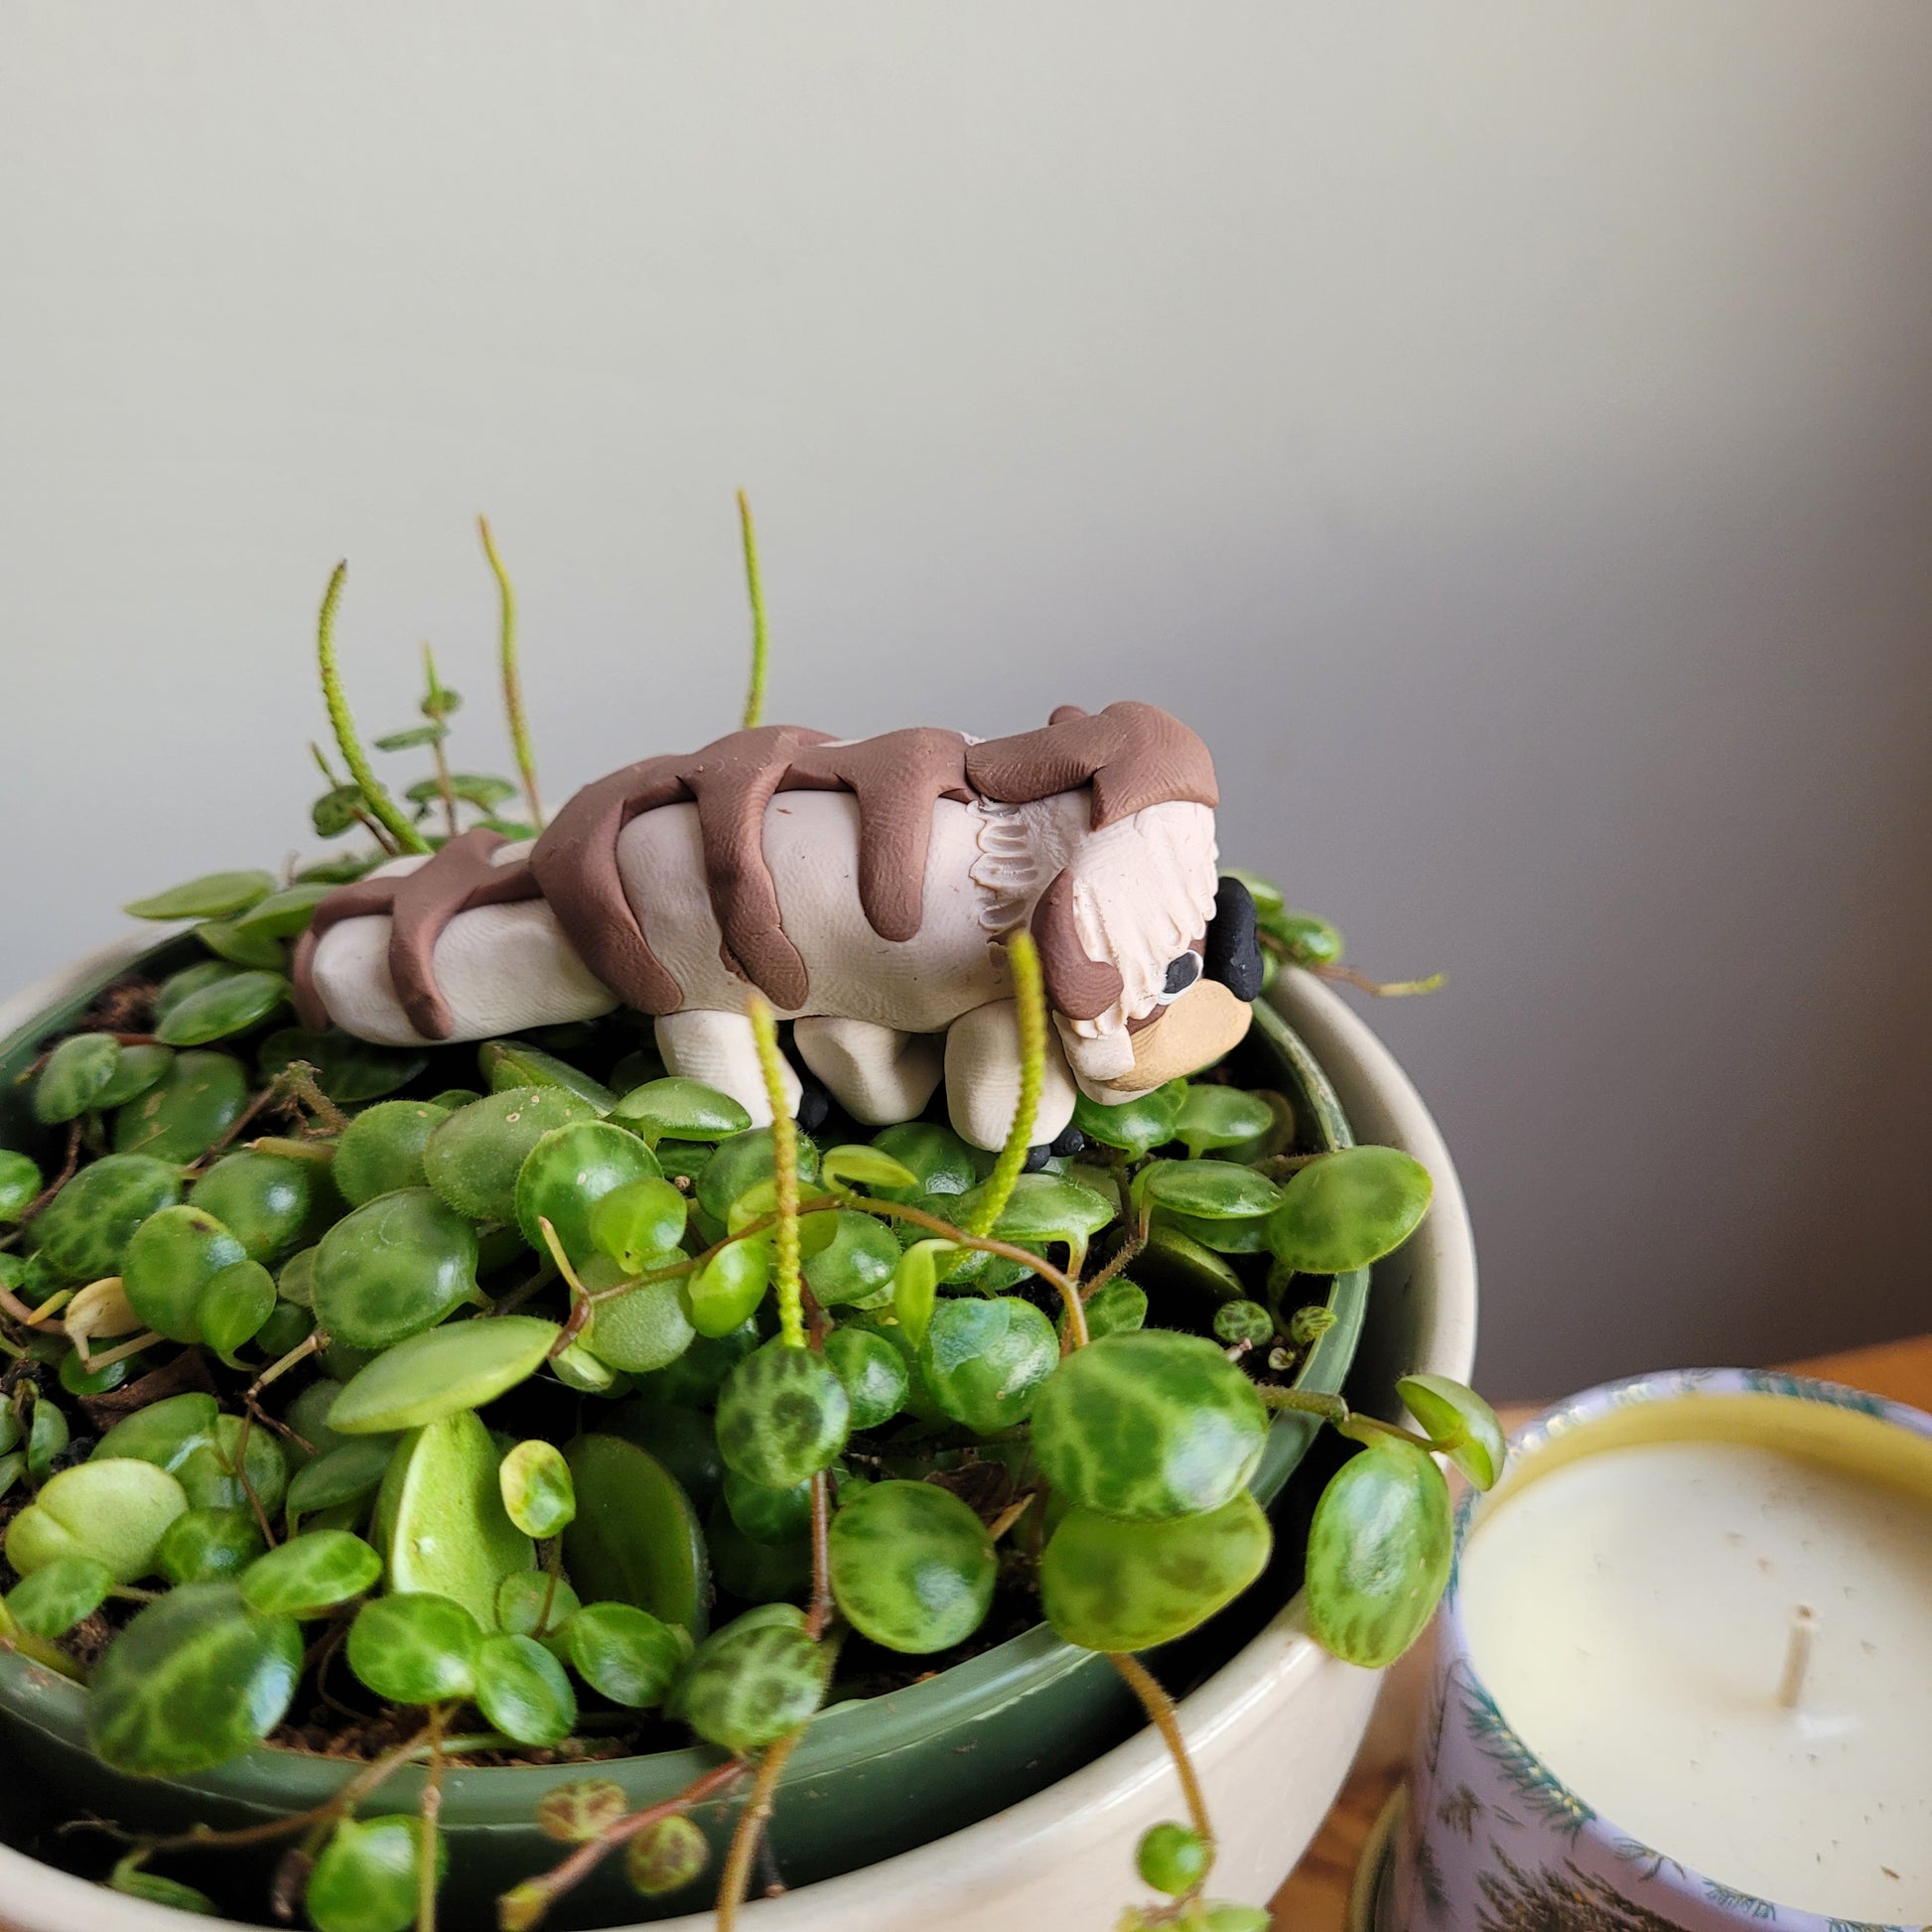 A side view of the Appa figurine nestled in a houseplant. A side view of the collectible Appa the flying bison figurine from the Avatar: The Last Airbender cartoon.